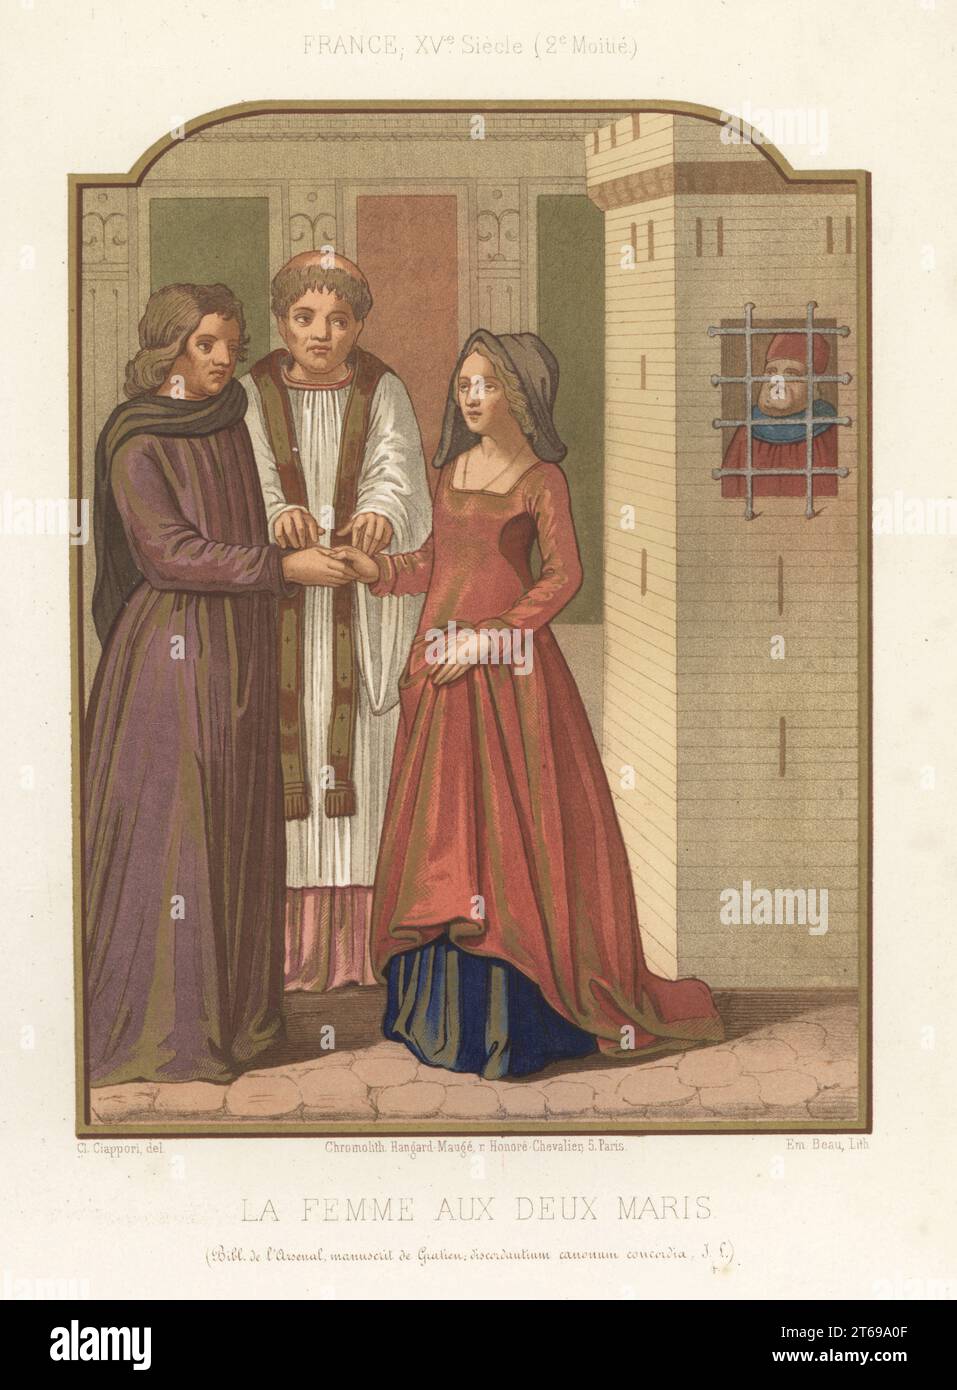 French marriage ceremony, 15th century. The bride's previous husband watches from a prison cell. La femme aux deux maris. From a miniature in Gratian's Decretum manuscript, MS JL4, Bibliotheque de l'Arsenal. Chromolithograph by Emile Beau after an illustration by Claudius Joseph Ciappori from Charles Louandres Les Arts Somptuaires, The Sumptuary Arts, Hangard-Mauge, Paris, 1858. Stock Photo